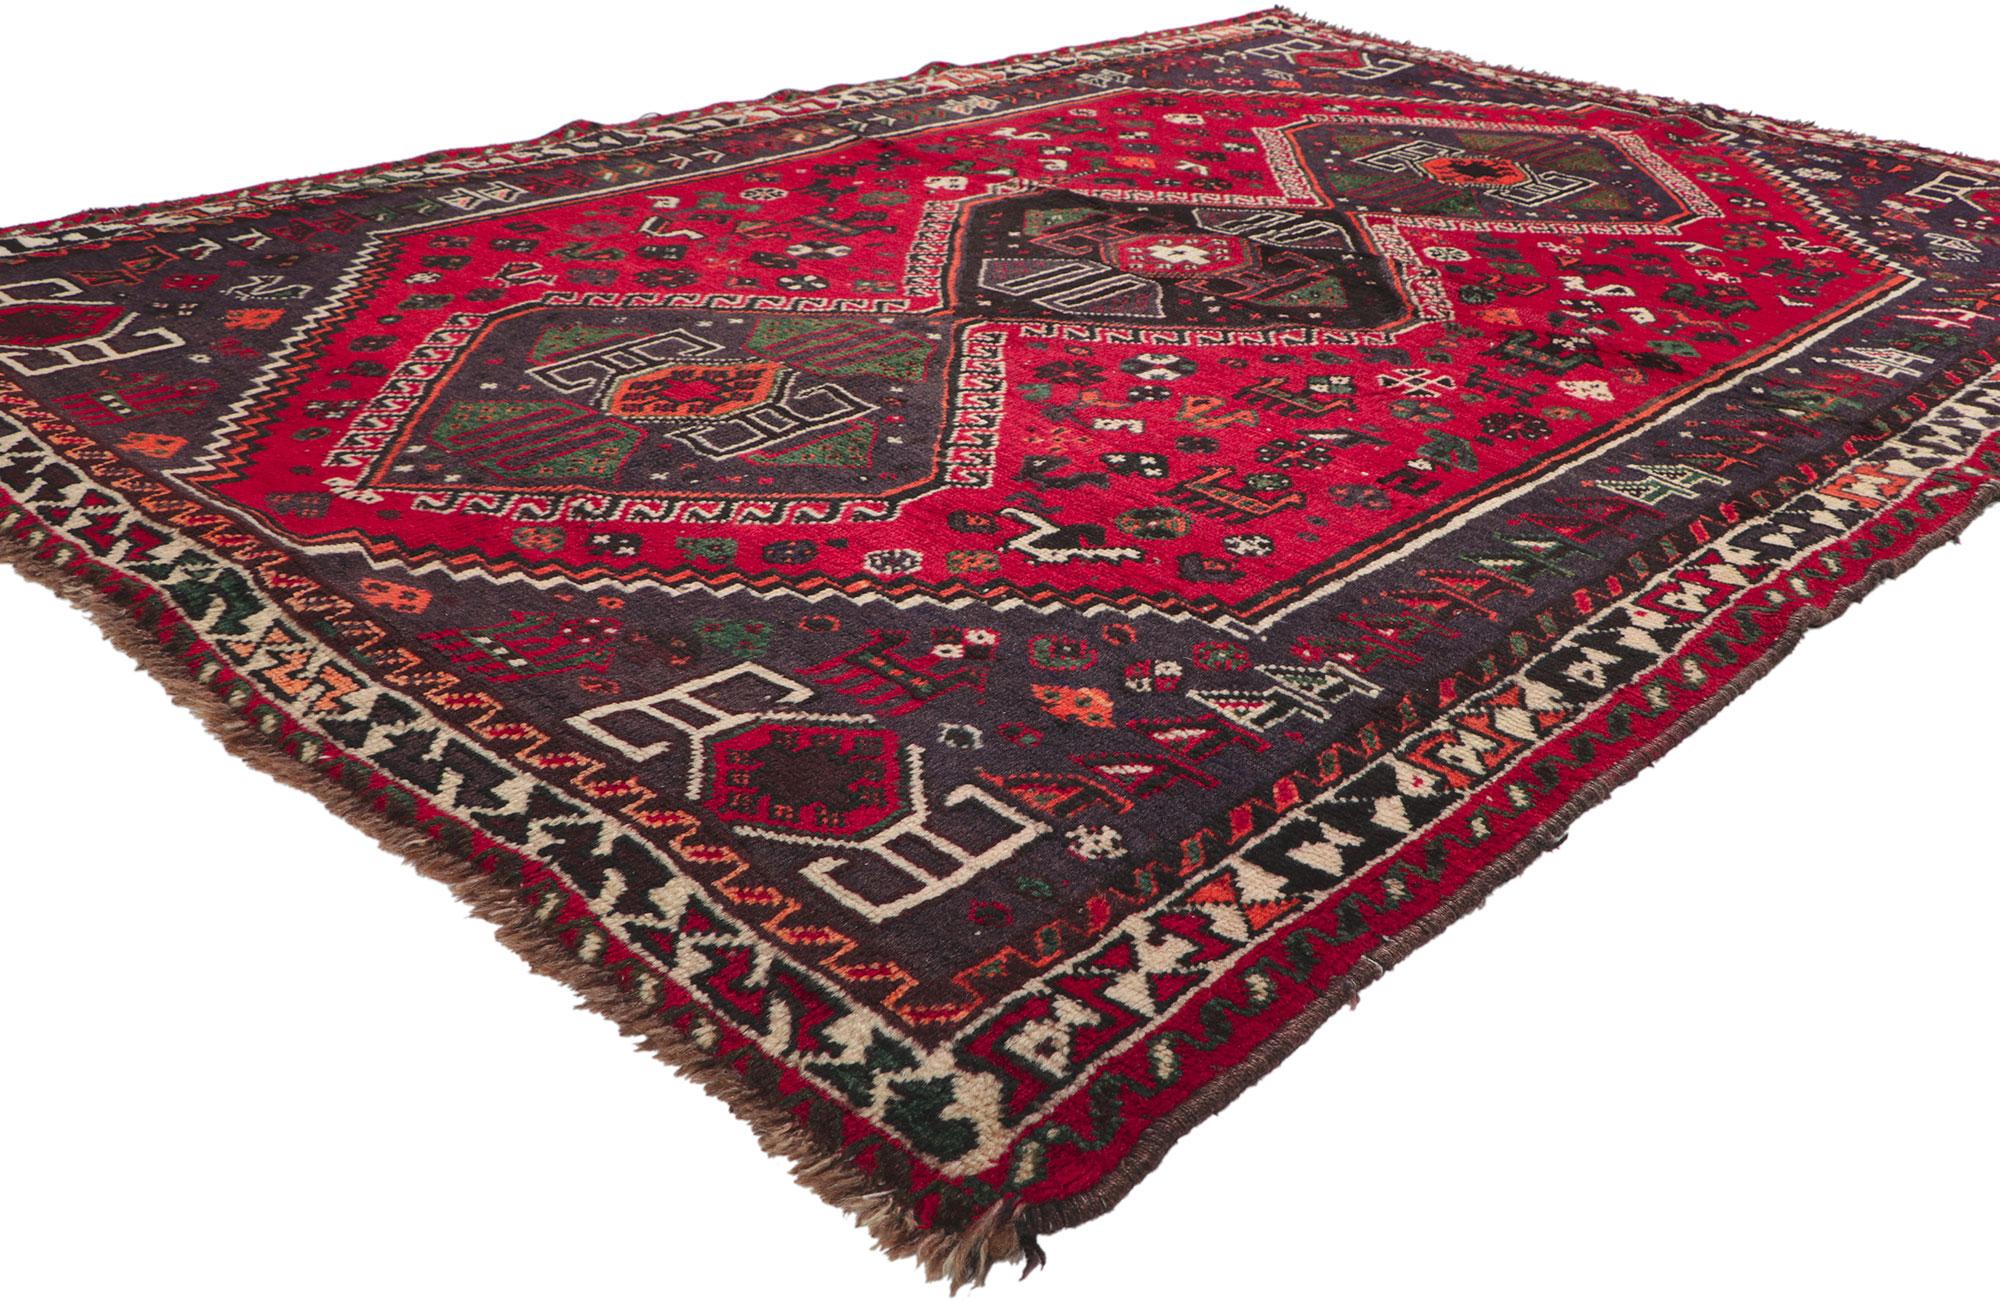 74735 Vintage Persian Shiraz Tribal Rug, 05'08 X 08'01. 
Nomadic charm meets Southwest style in this hand knotted wool vintage Persian Shiraz rug. The compelling tribal pattern and vibrant earth-tone colors woven into this piece work together